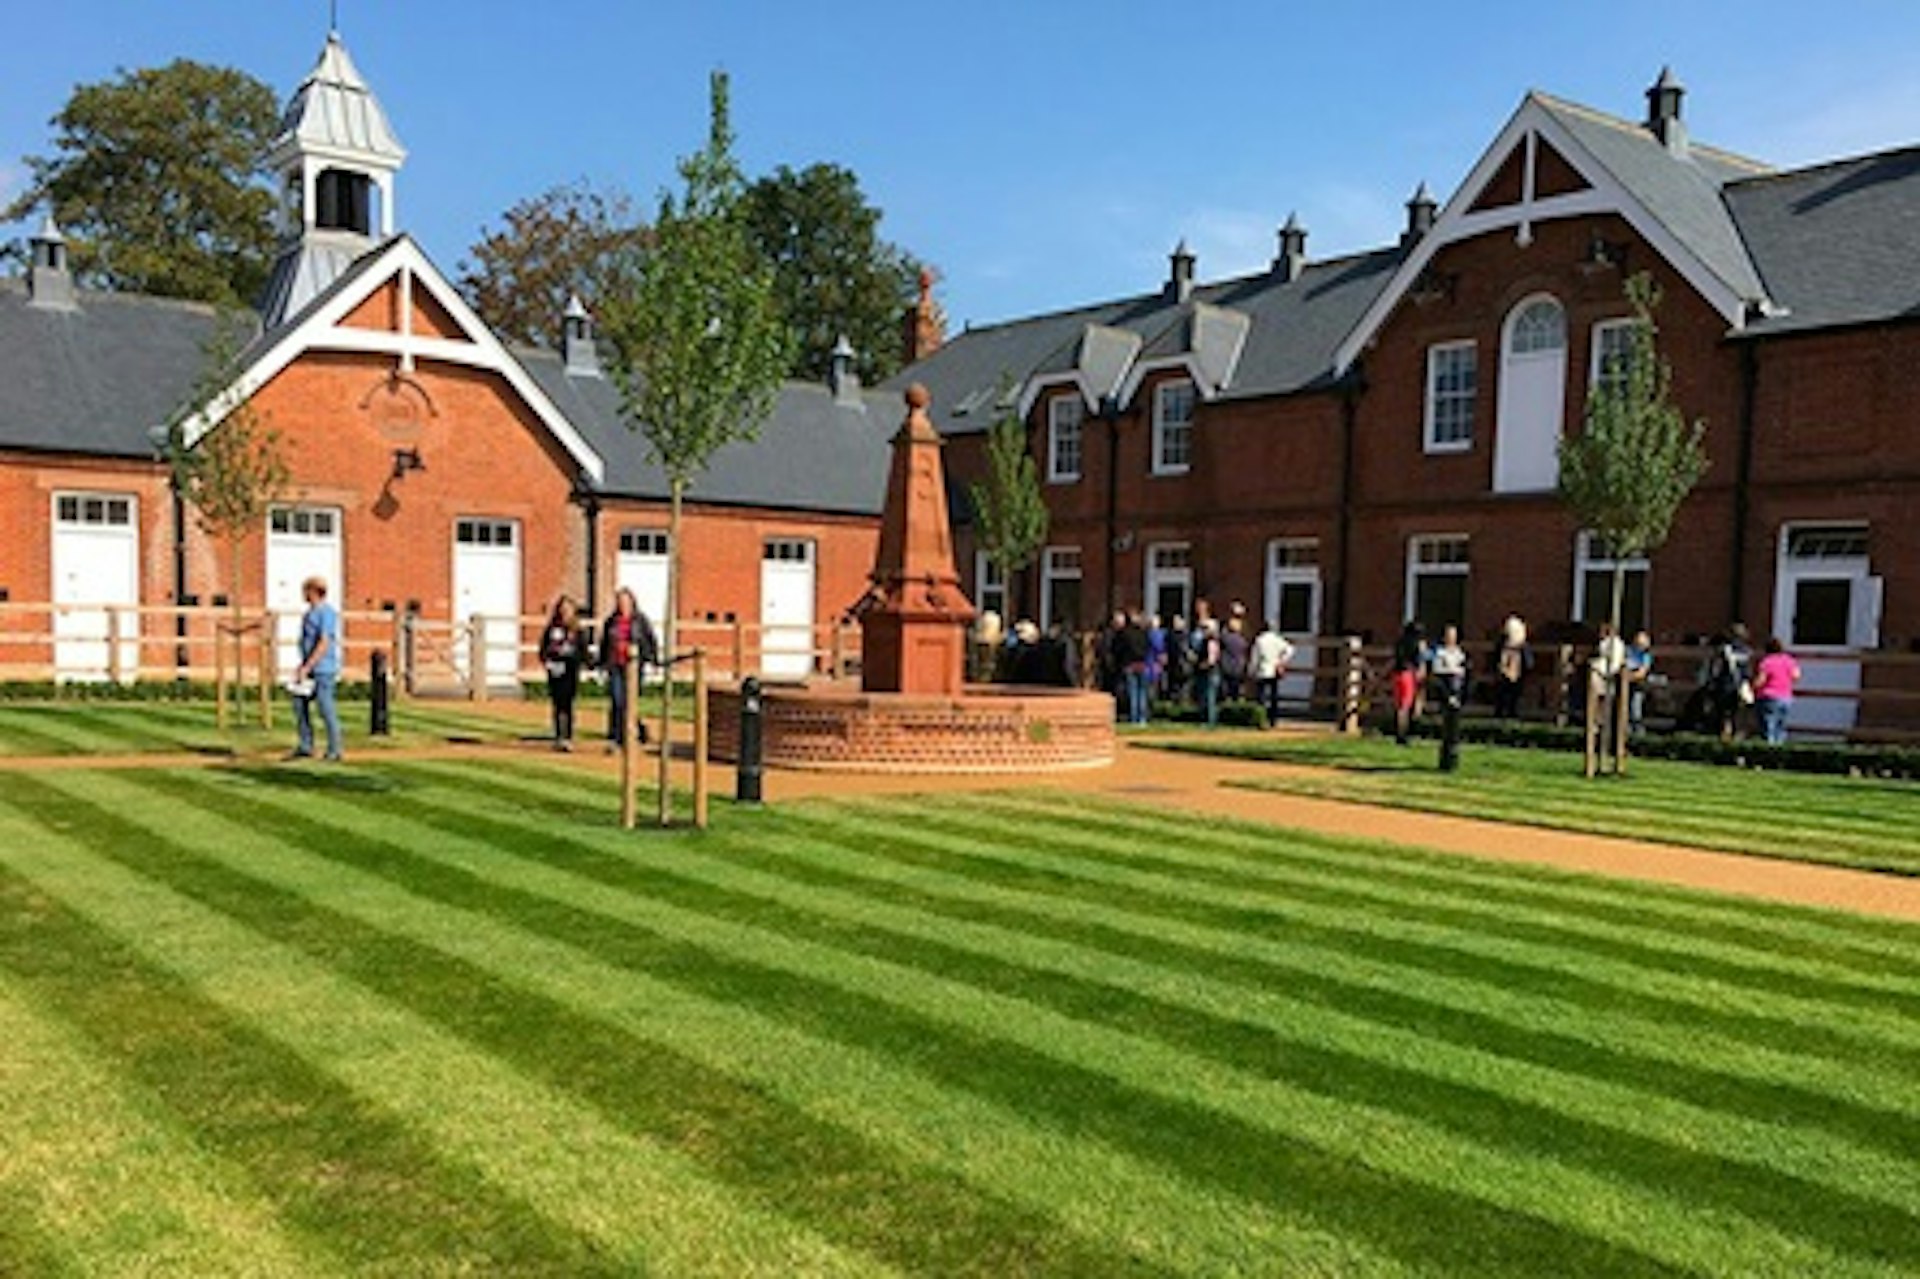 Ultimate Horse Racing Lover's Experience with Behind the Scenes Full Day Guided Tour for Two at Newmarket 3